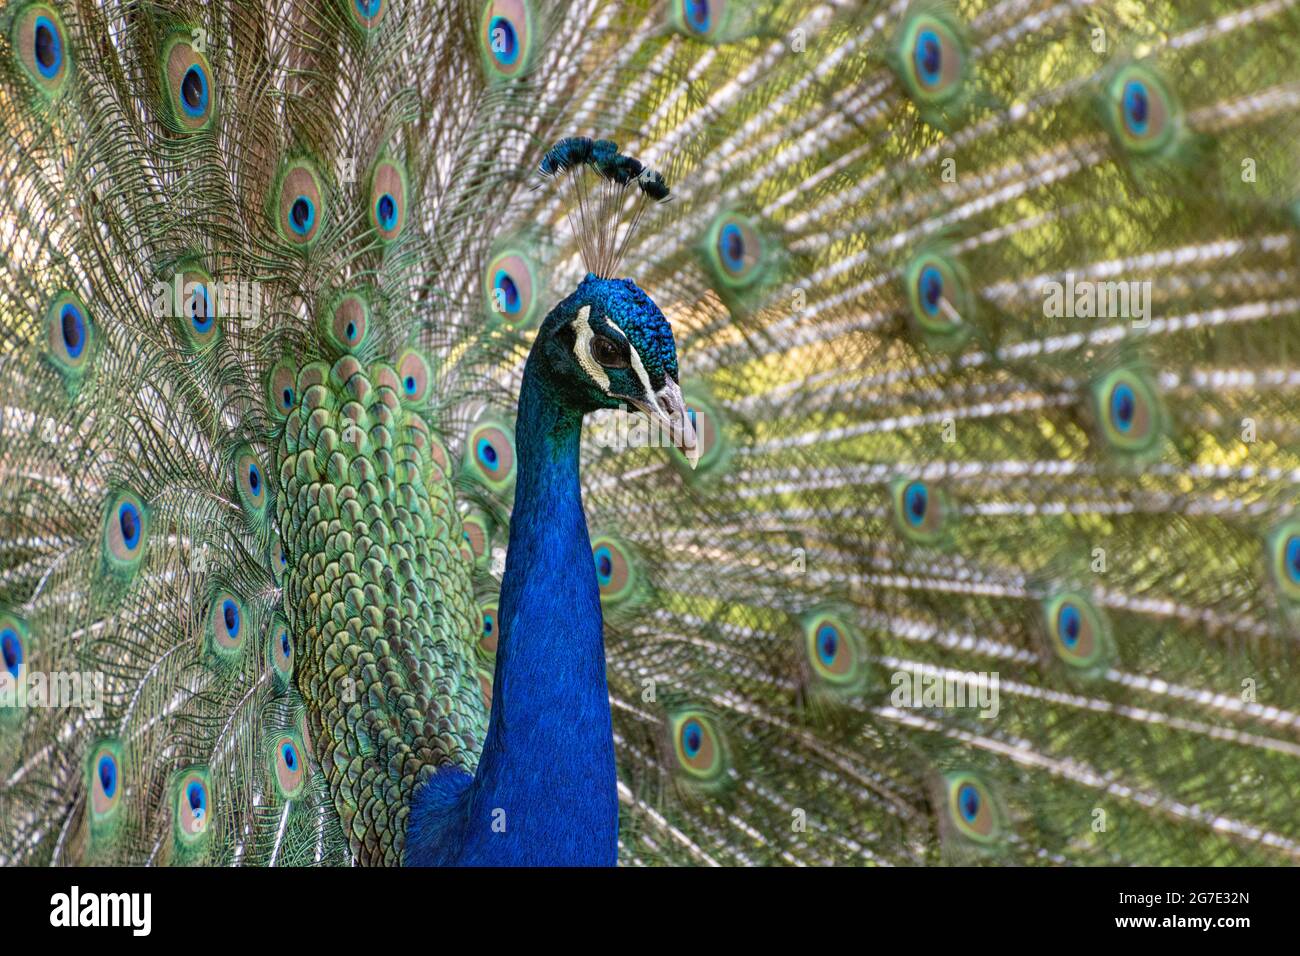 close up of a peacock head against its plume of feathers Stock Photo